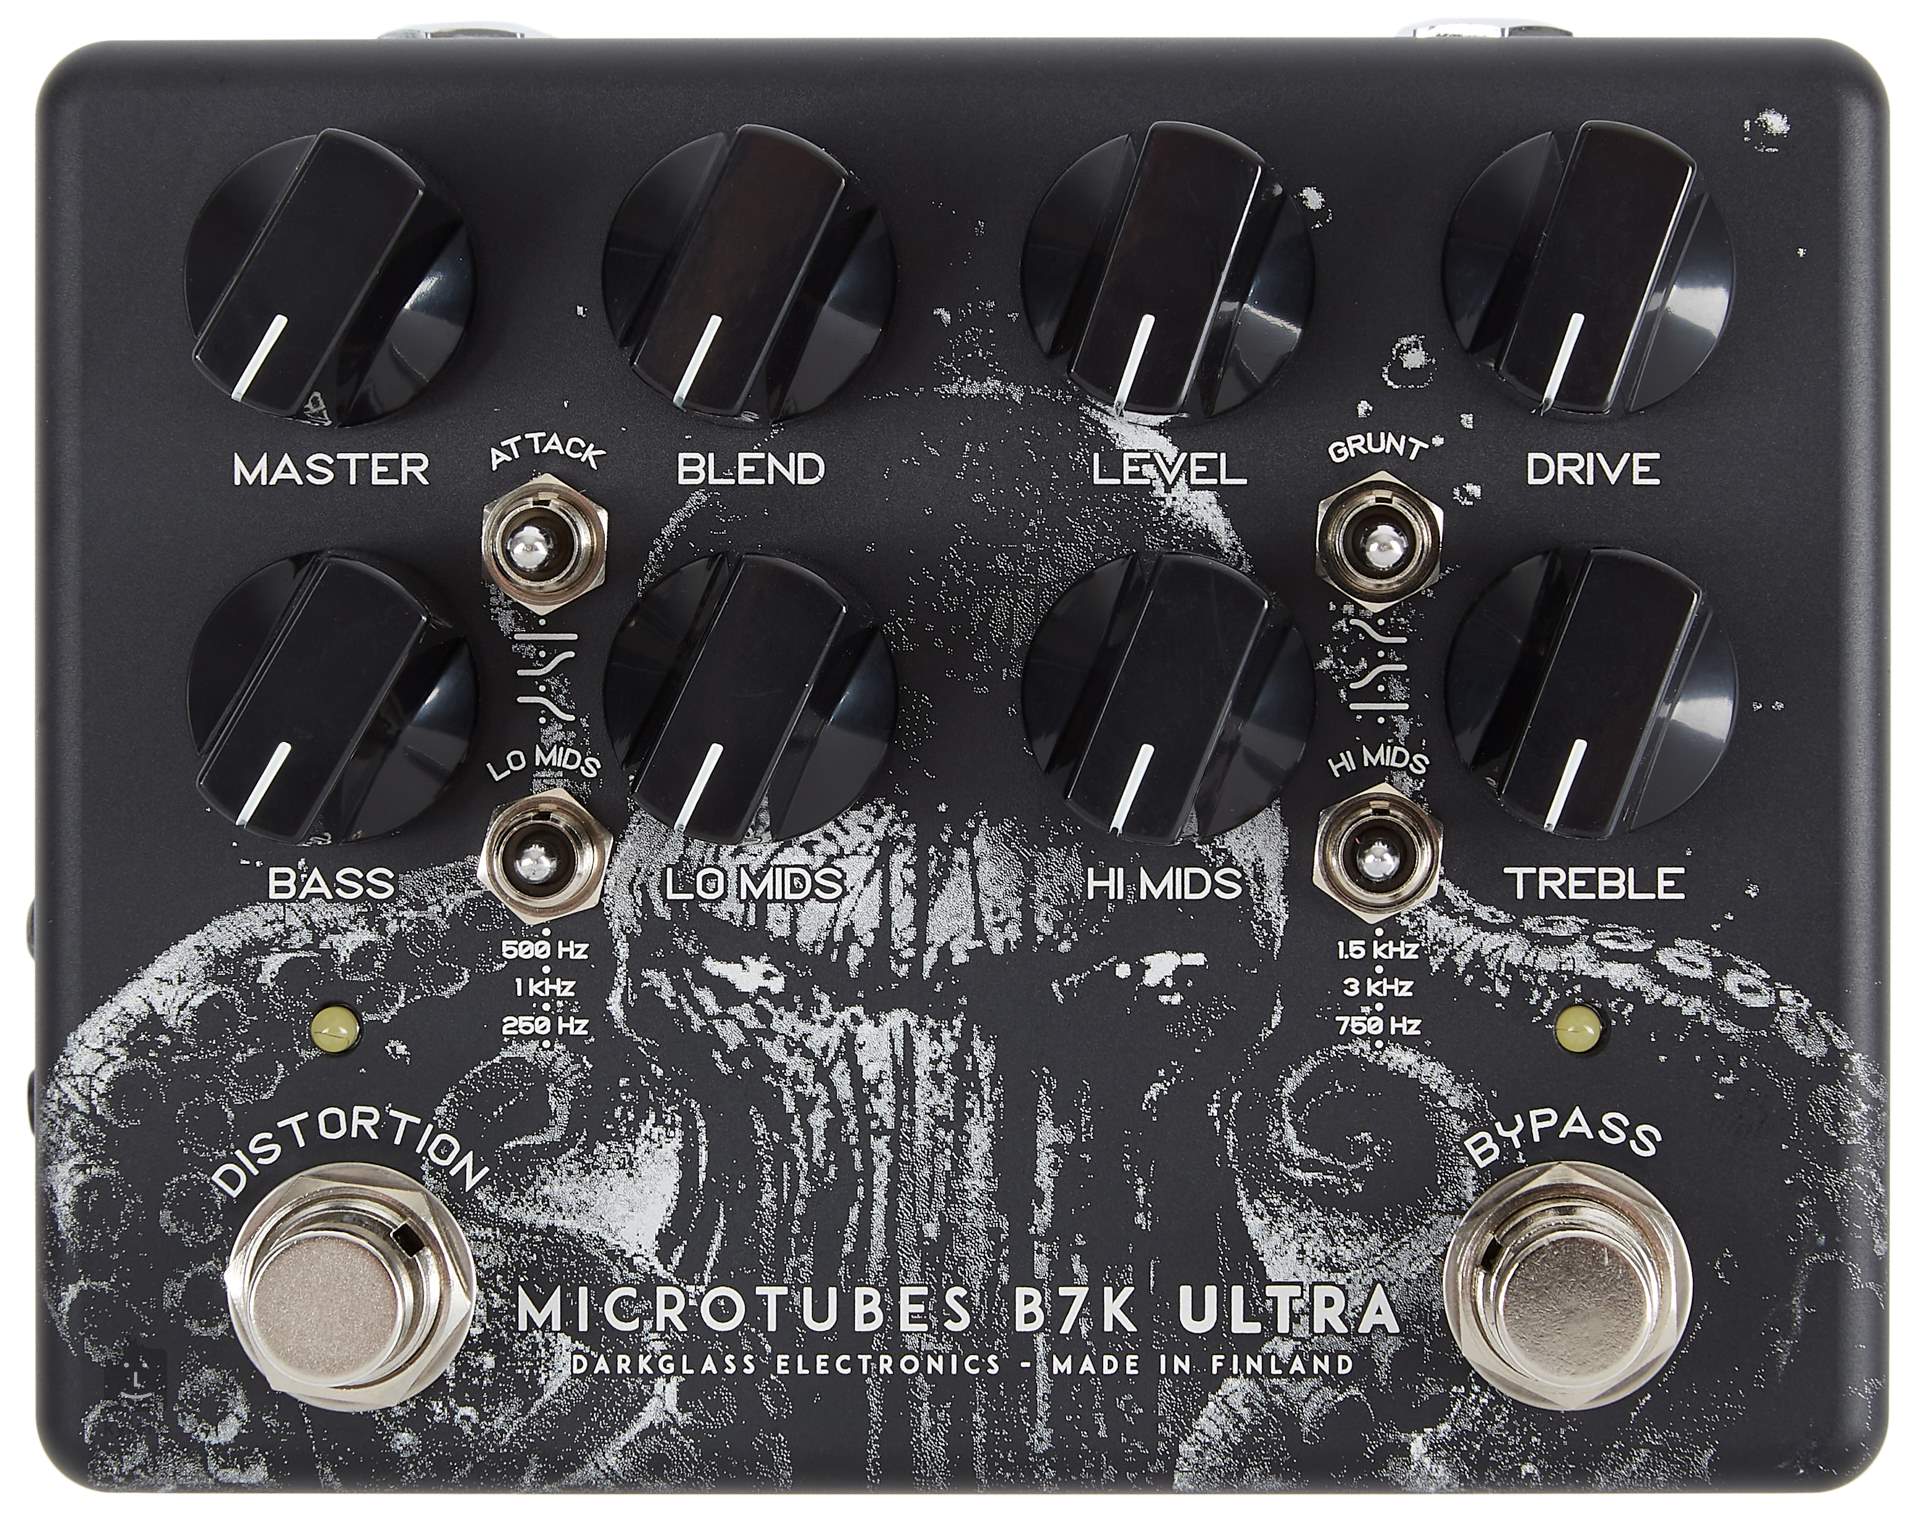 DARKGLASS Microtubes B7K Ultra v2 (AUX-IN) “The Squid” Limited Edition